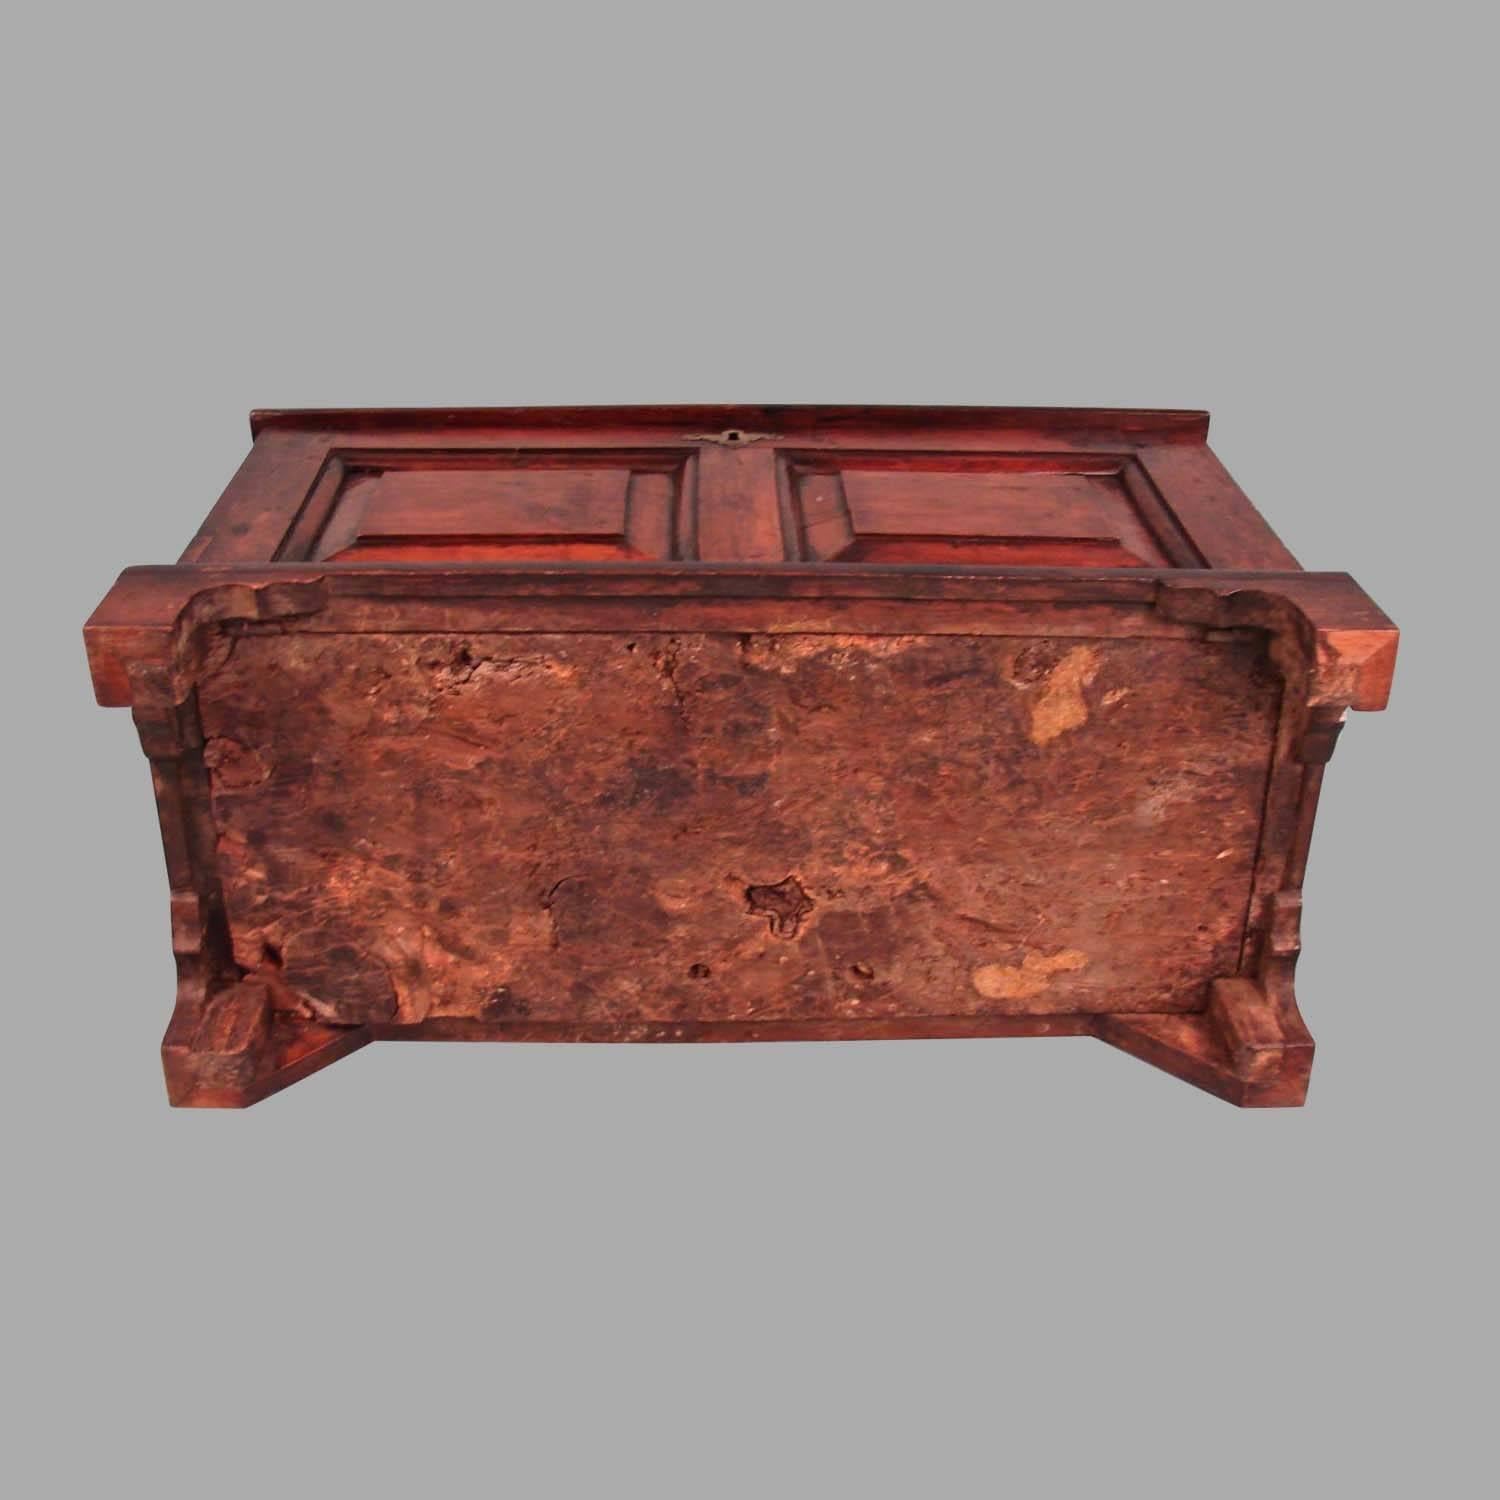 A small-scale fruitwood chest or coffer, the molded top over an inset panelled body supported on bracket feet, circa 1760.